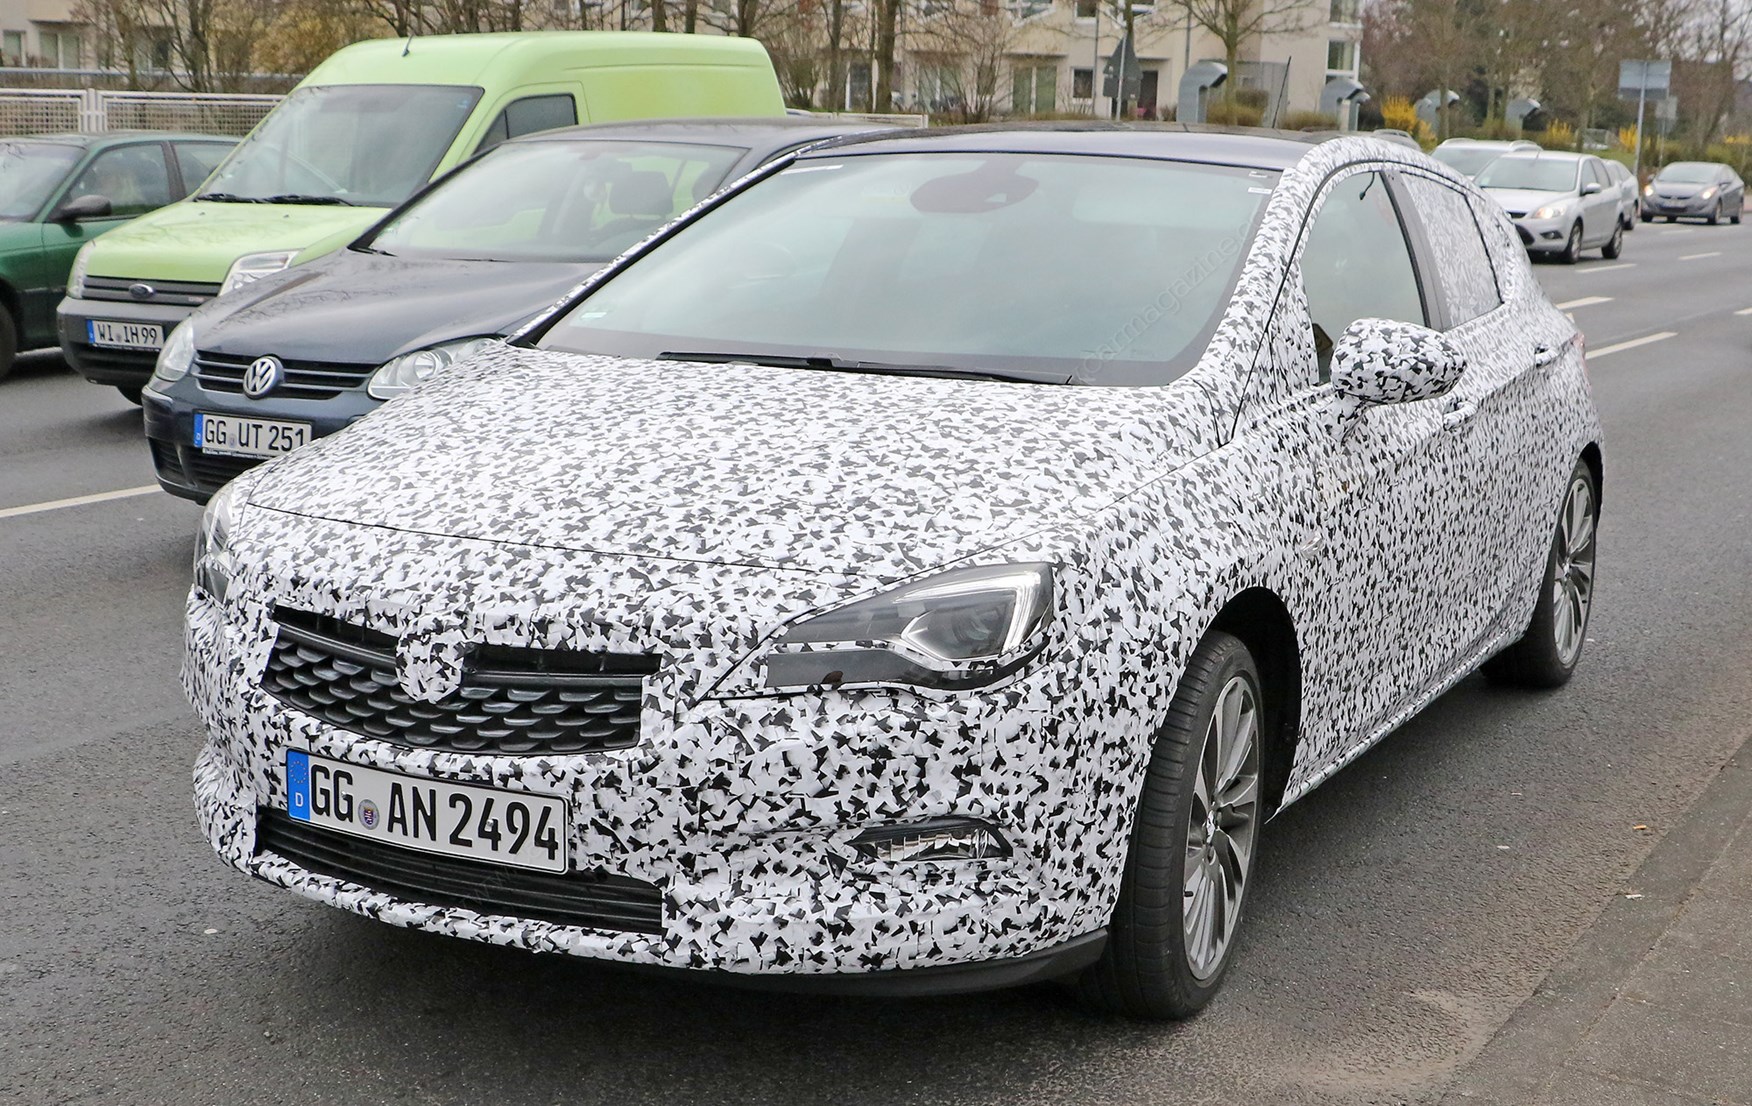 Vauxhall's renewal continues apace: new 2015 Astra spied